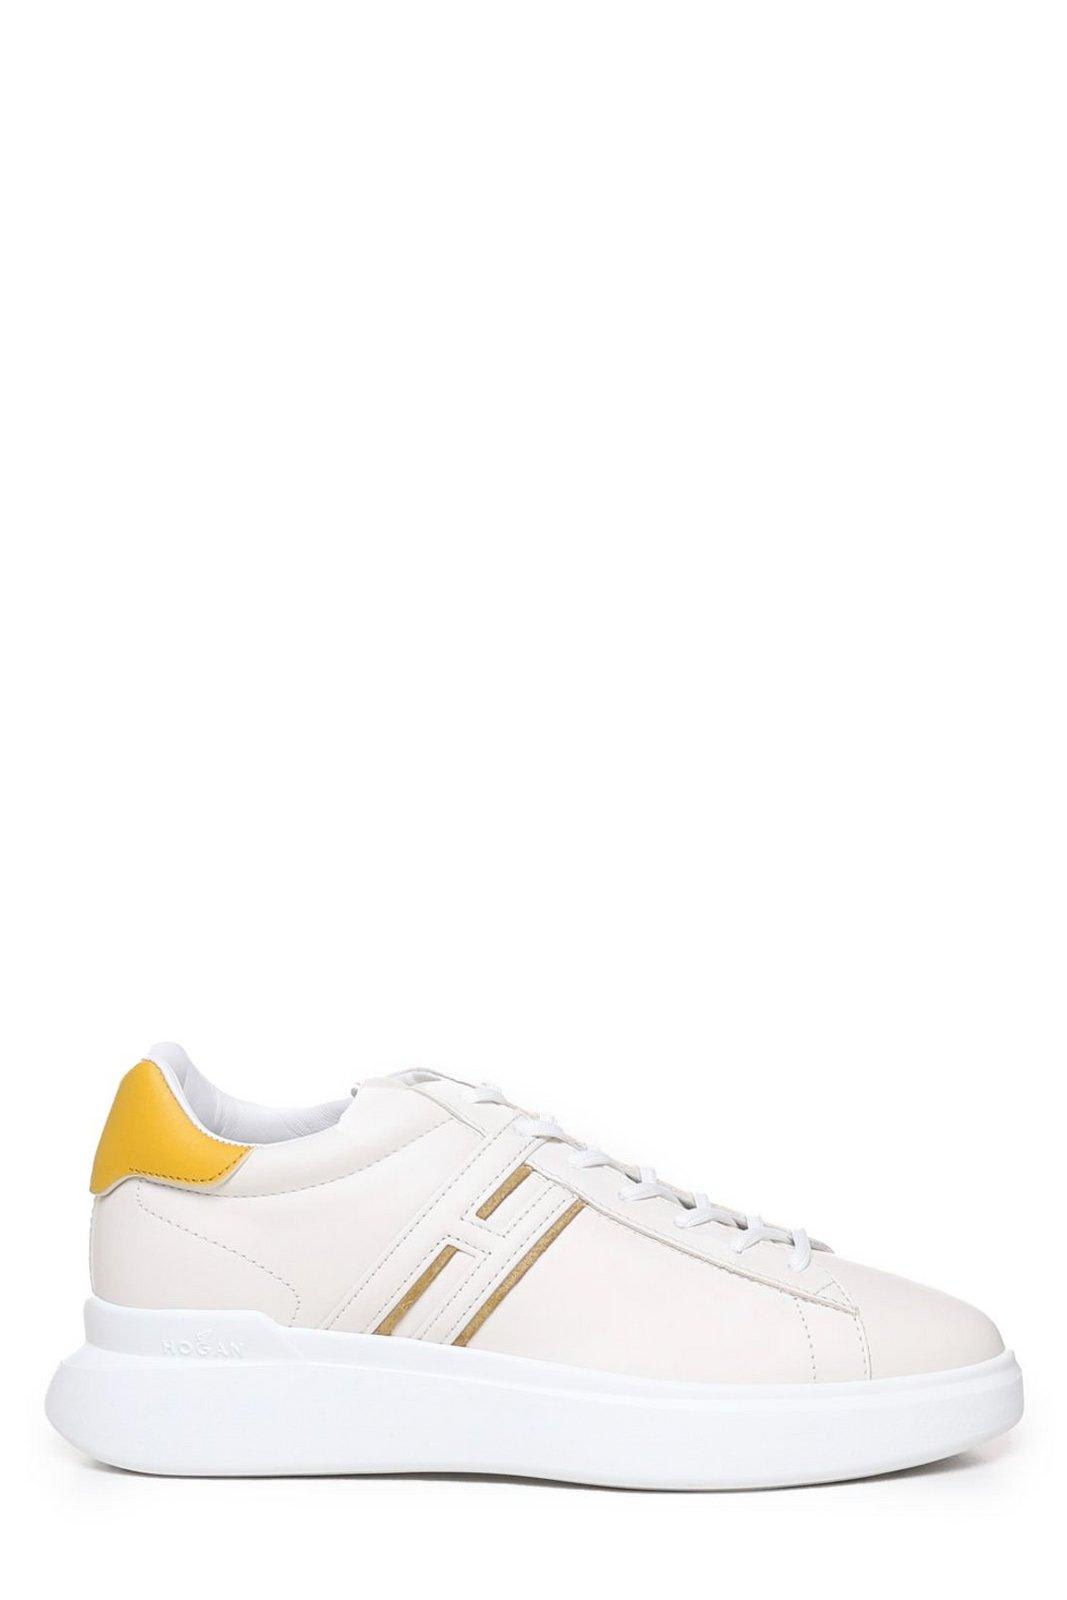 Shop Hogan H580 Side H Patch Sneakers In White